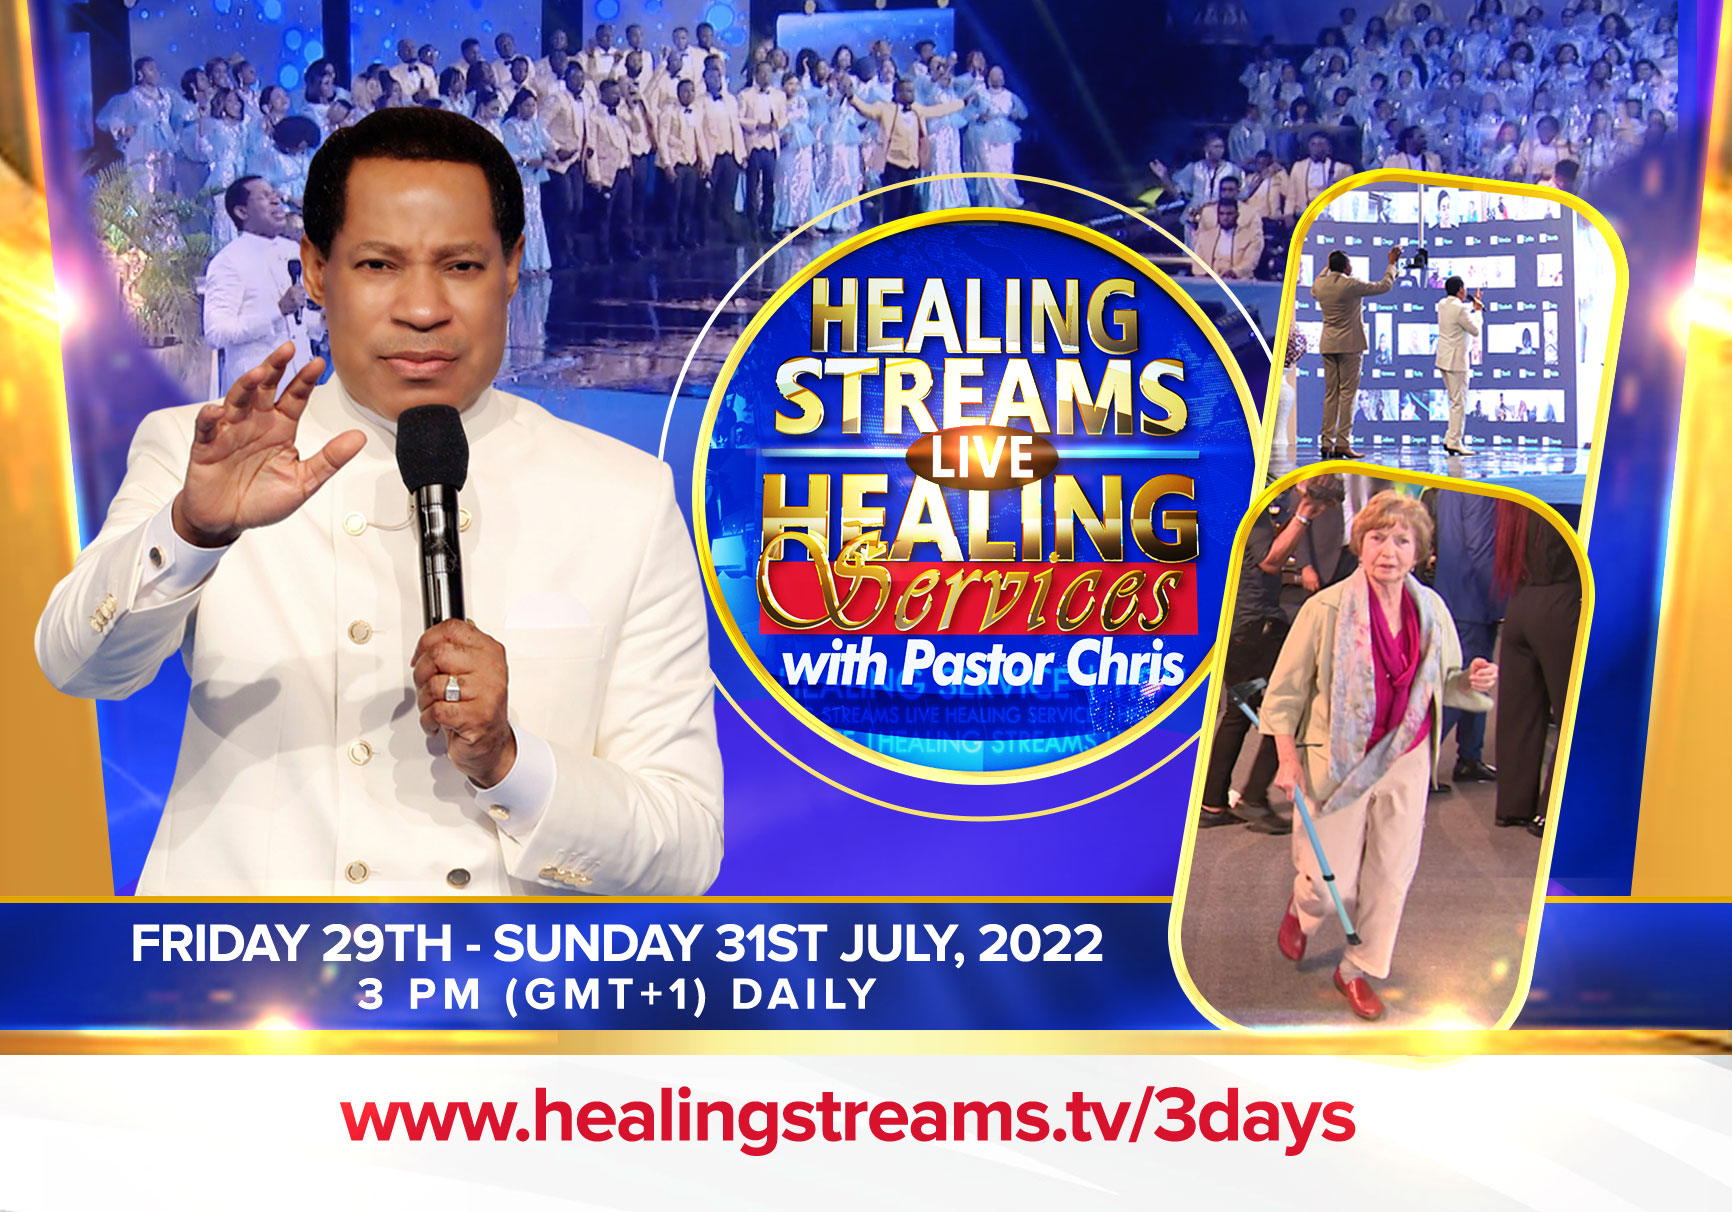 A CARNIVAL OF MIRACLES AT THE UPCOMING JULY 2022 HSLHS WITH PASTOR CHRIS